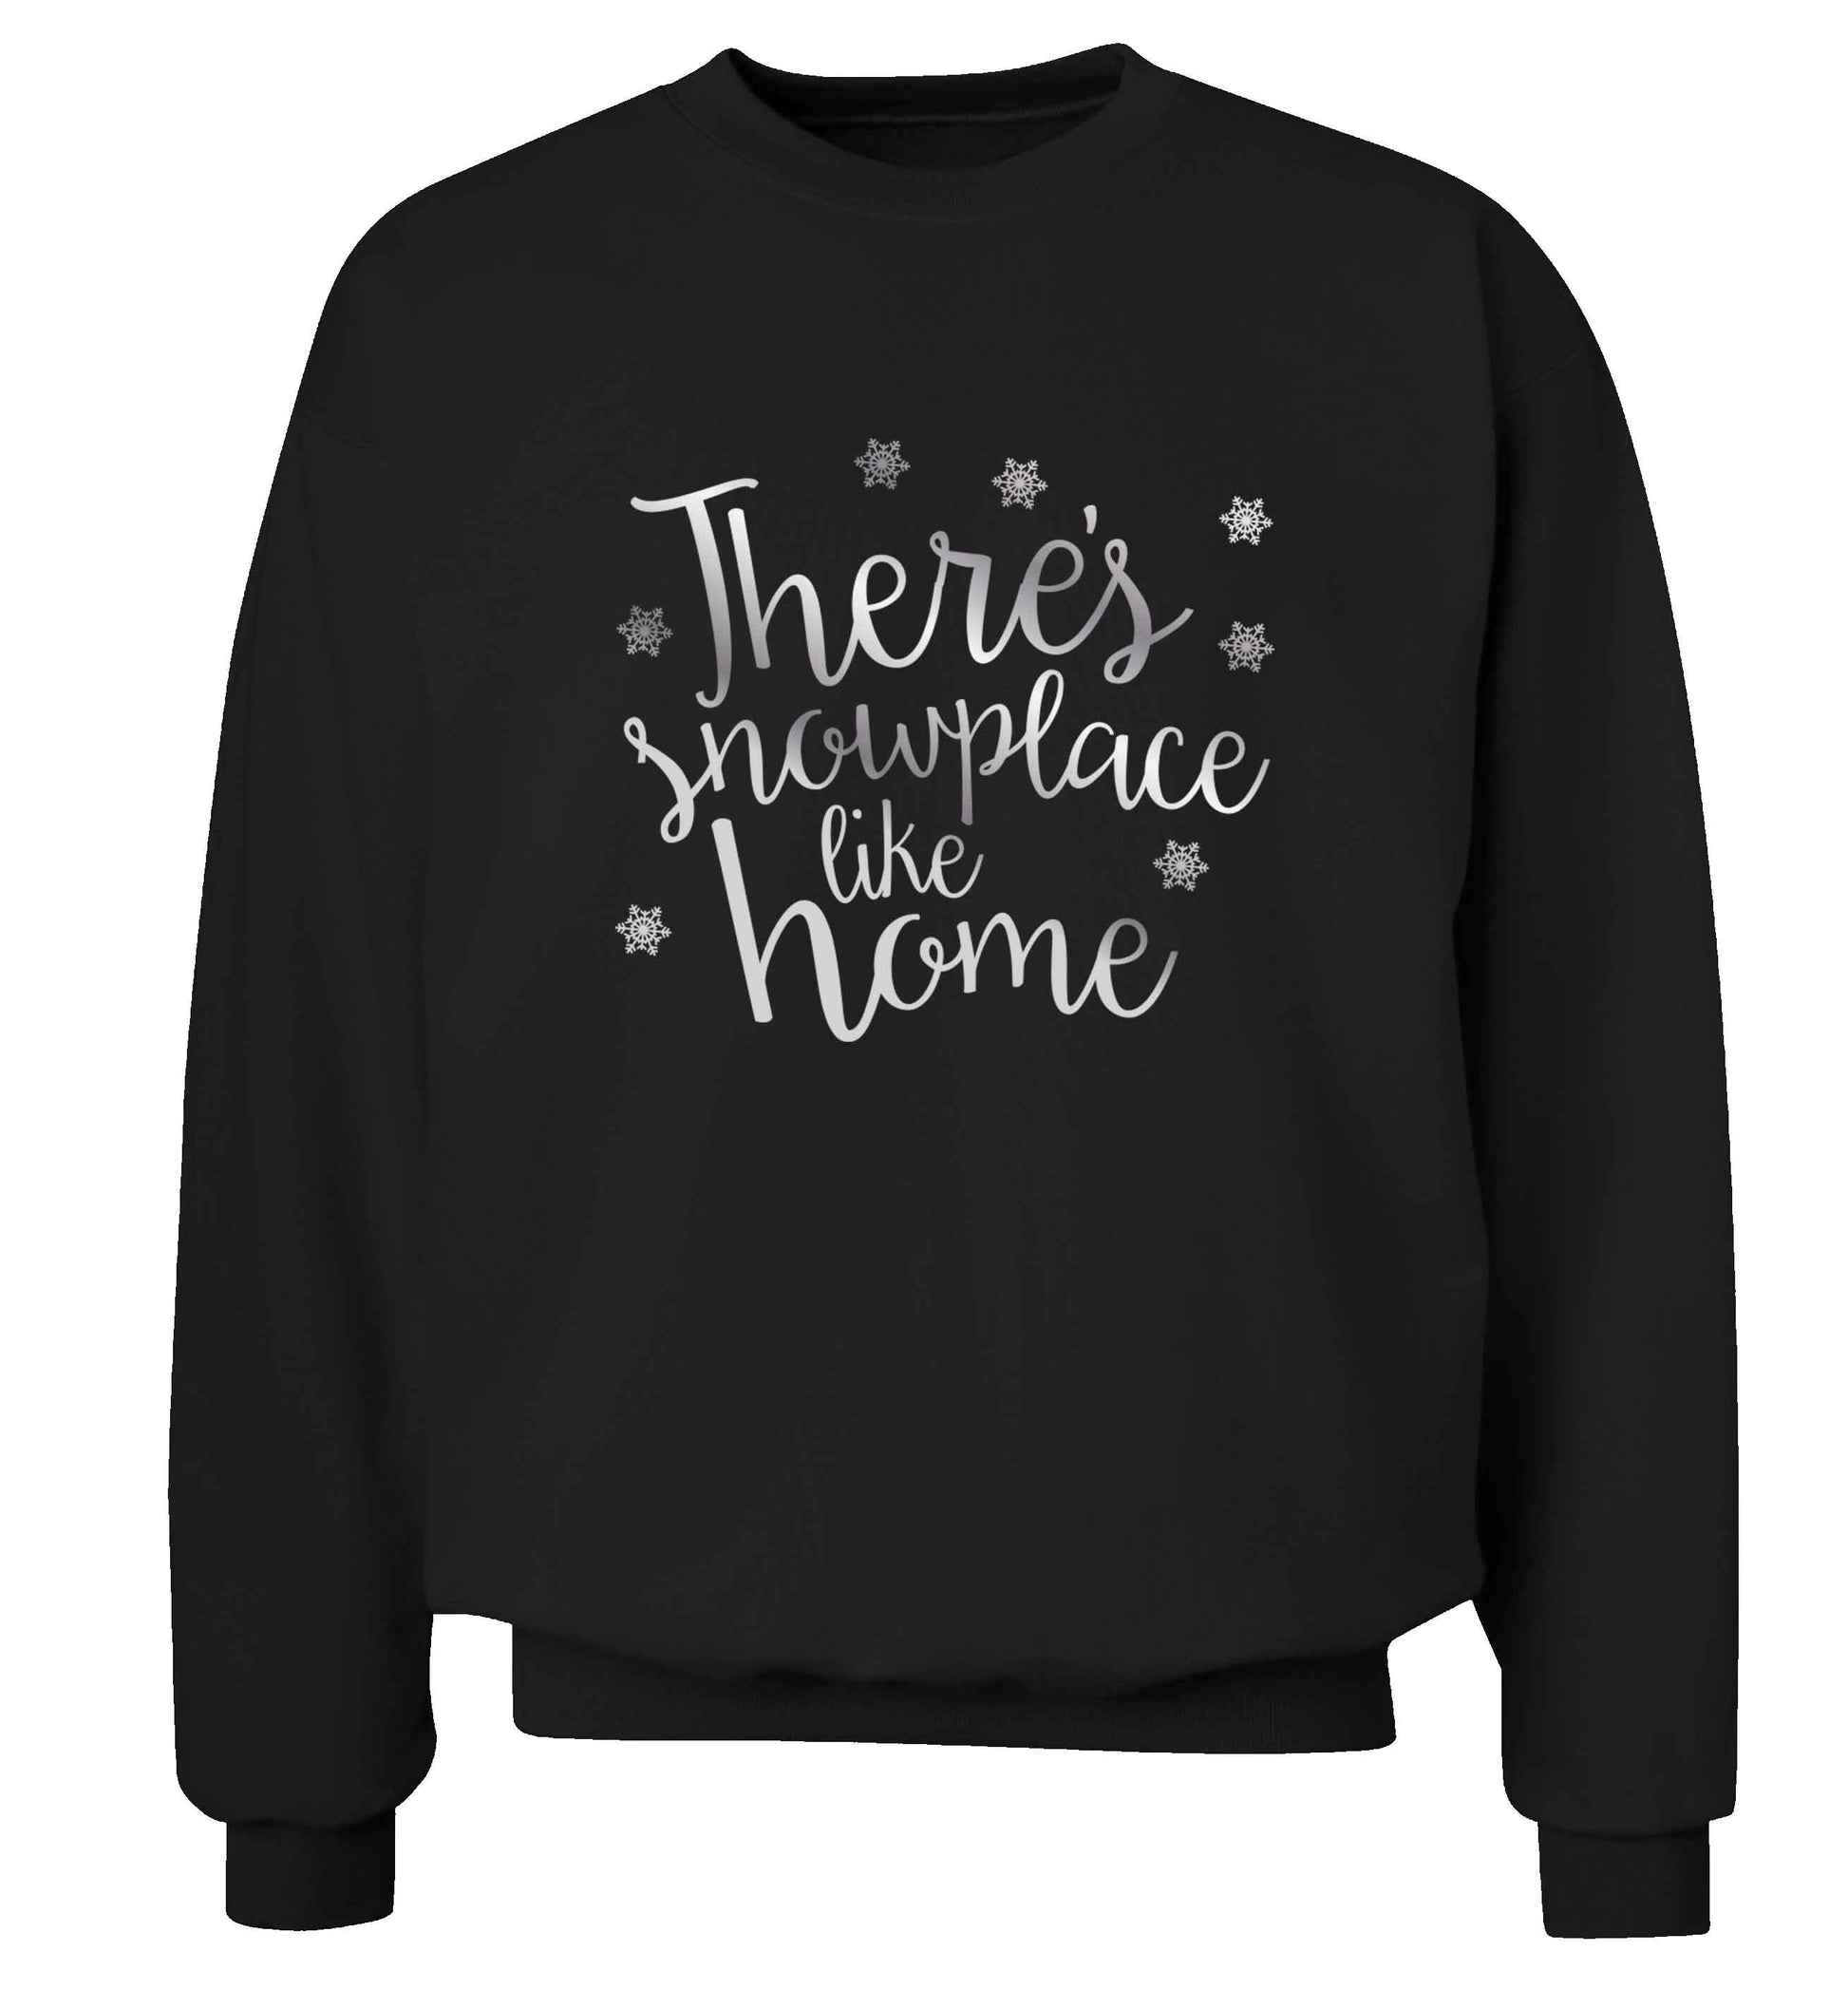 There's snowplace like home - metallic silver adult's unisex black sweater 2XL